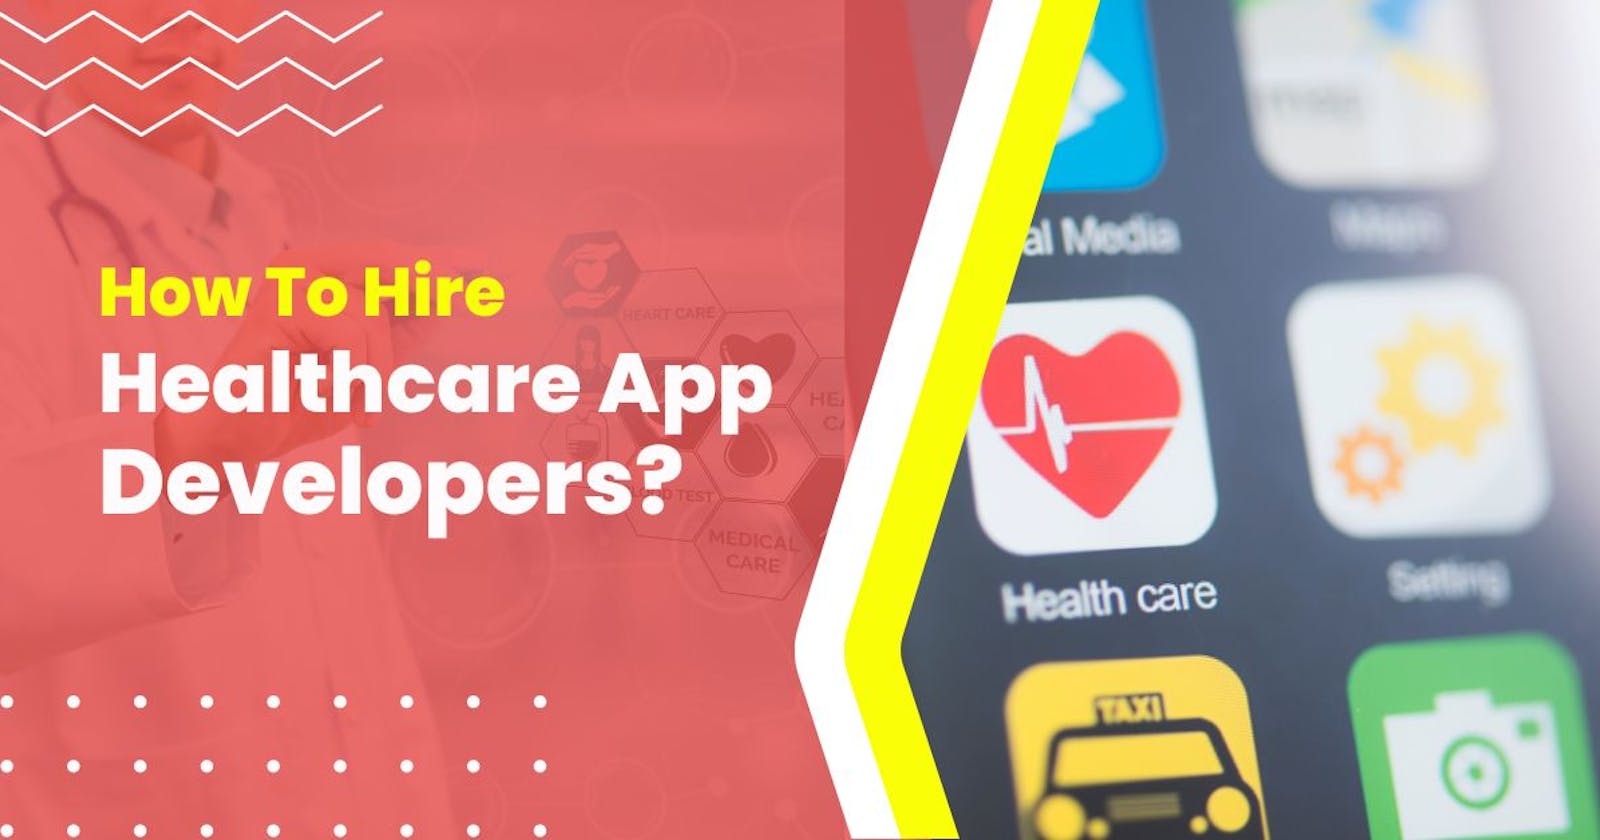 How to hire Healthcare pp Developers?